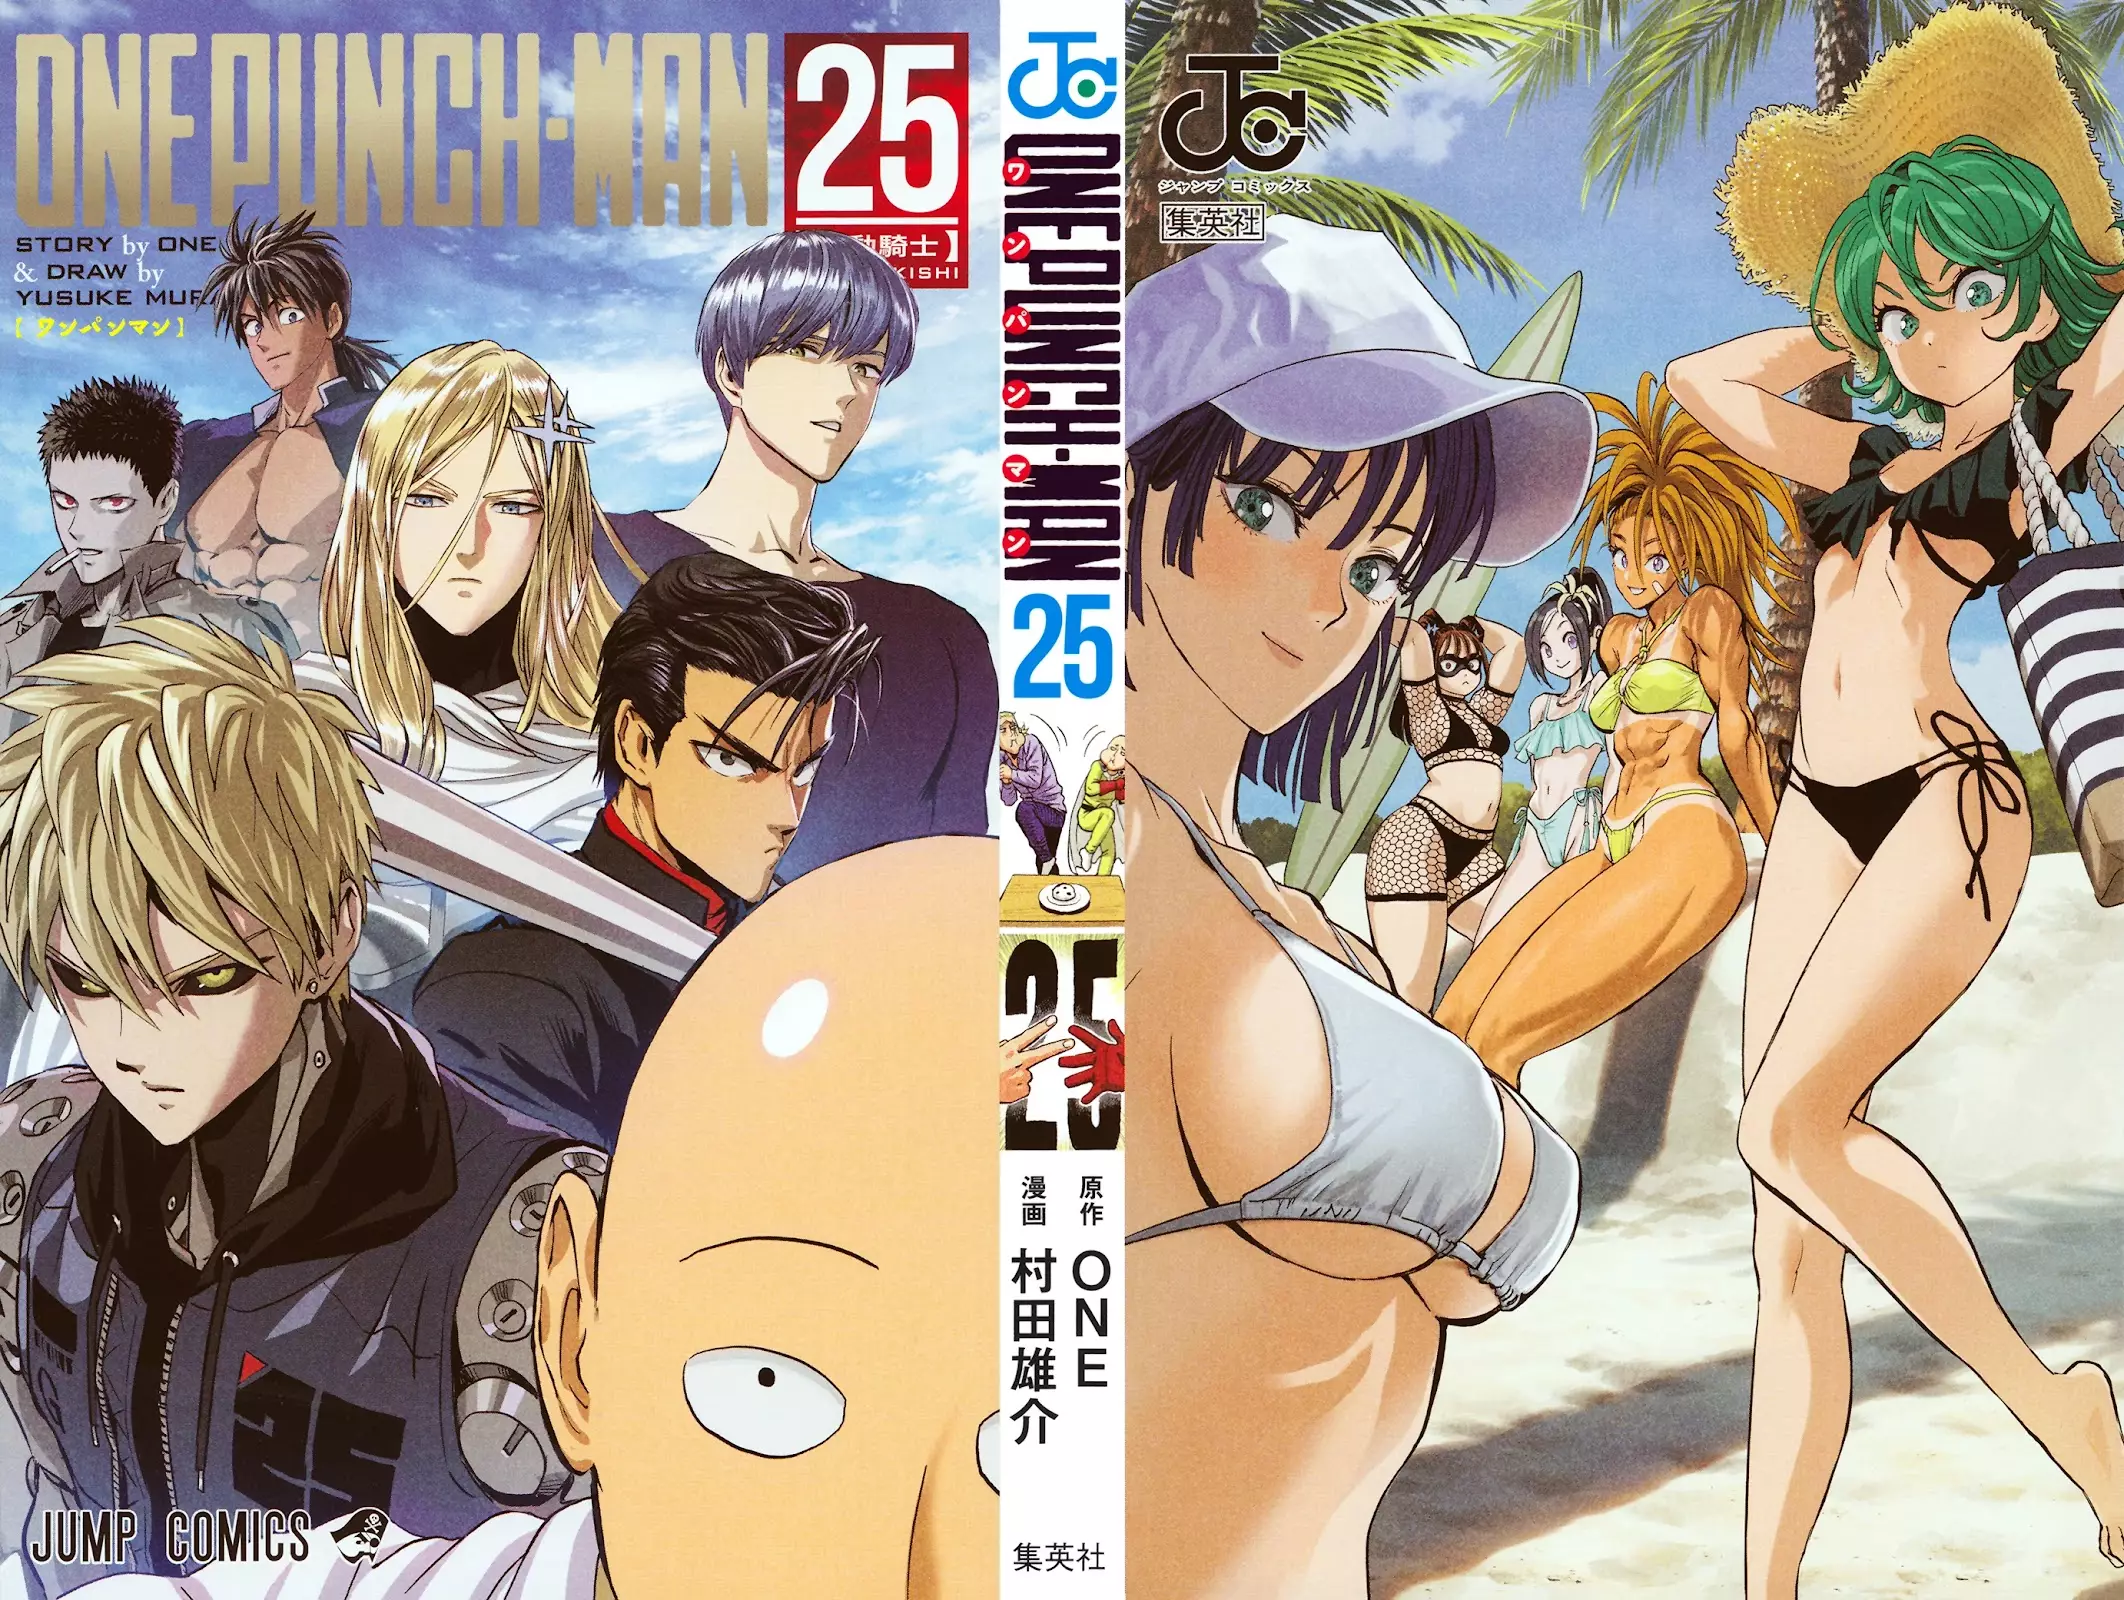 One Punch Man Chapter 163.5, READ One Punch Man Chapter 163.5 ONLINE, lost in the cloud genre,lost in the cloud gif,lost in the cloud girl,lost in the cloud goods,lost in the cloud goodreads,lost in the cloud,lost ark cloud gaming,lost odyssey cloud gaming,lost in the cloud fanart,lost in the cloud fanfic,lost in the cloud fandom,lost in the cloud first kiss,lost in the cloud font,lost in the cloud ending,lost in the cloud episode 97,lost in the cloud edit,lost in the cloud explained,lost in the cloud dog,lost in the cloud discord server,lost in the cloud desktop wallpaper,lost in the cloud drawing,can't find my cloud on network,lost in the cloud characters,lost in the cloud chapter 93 release date,lost in the cloud birthday,lost in the cloud birthday art,lost in the cloud background,lost in the cloud banner,lost in the clouds meaning,what is the black cloud in lost,lost in the cloud ao3,lost in the cloud anime,lost in the cloud art,lost in the cloud author twitter,lost in the cloud author instagram,lost in the cloud artist,lost in the cloud acrylic stand,lost in the cloud artist twitter,lost in the cloud art style,lost in the cloud analysis